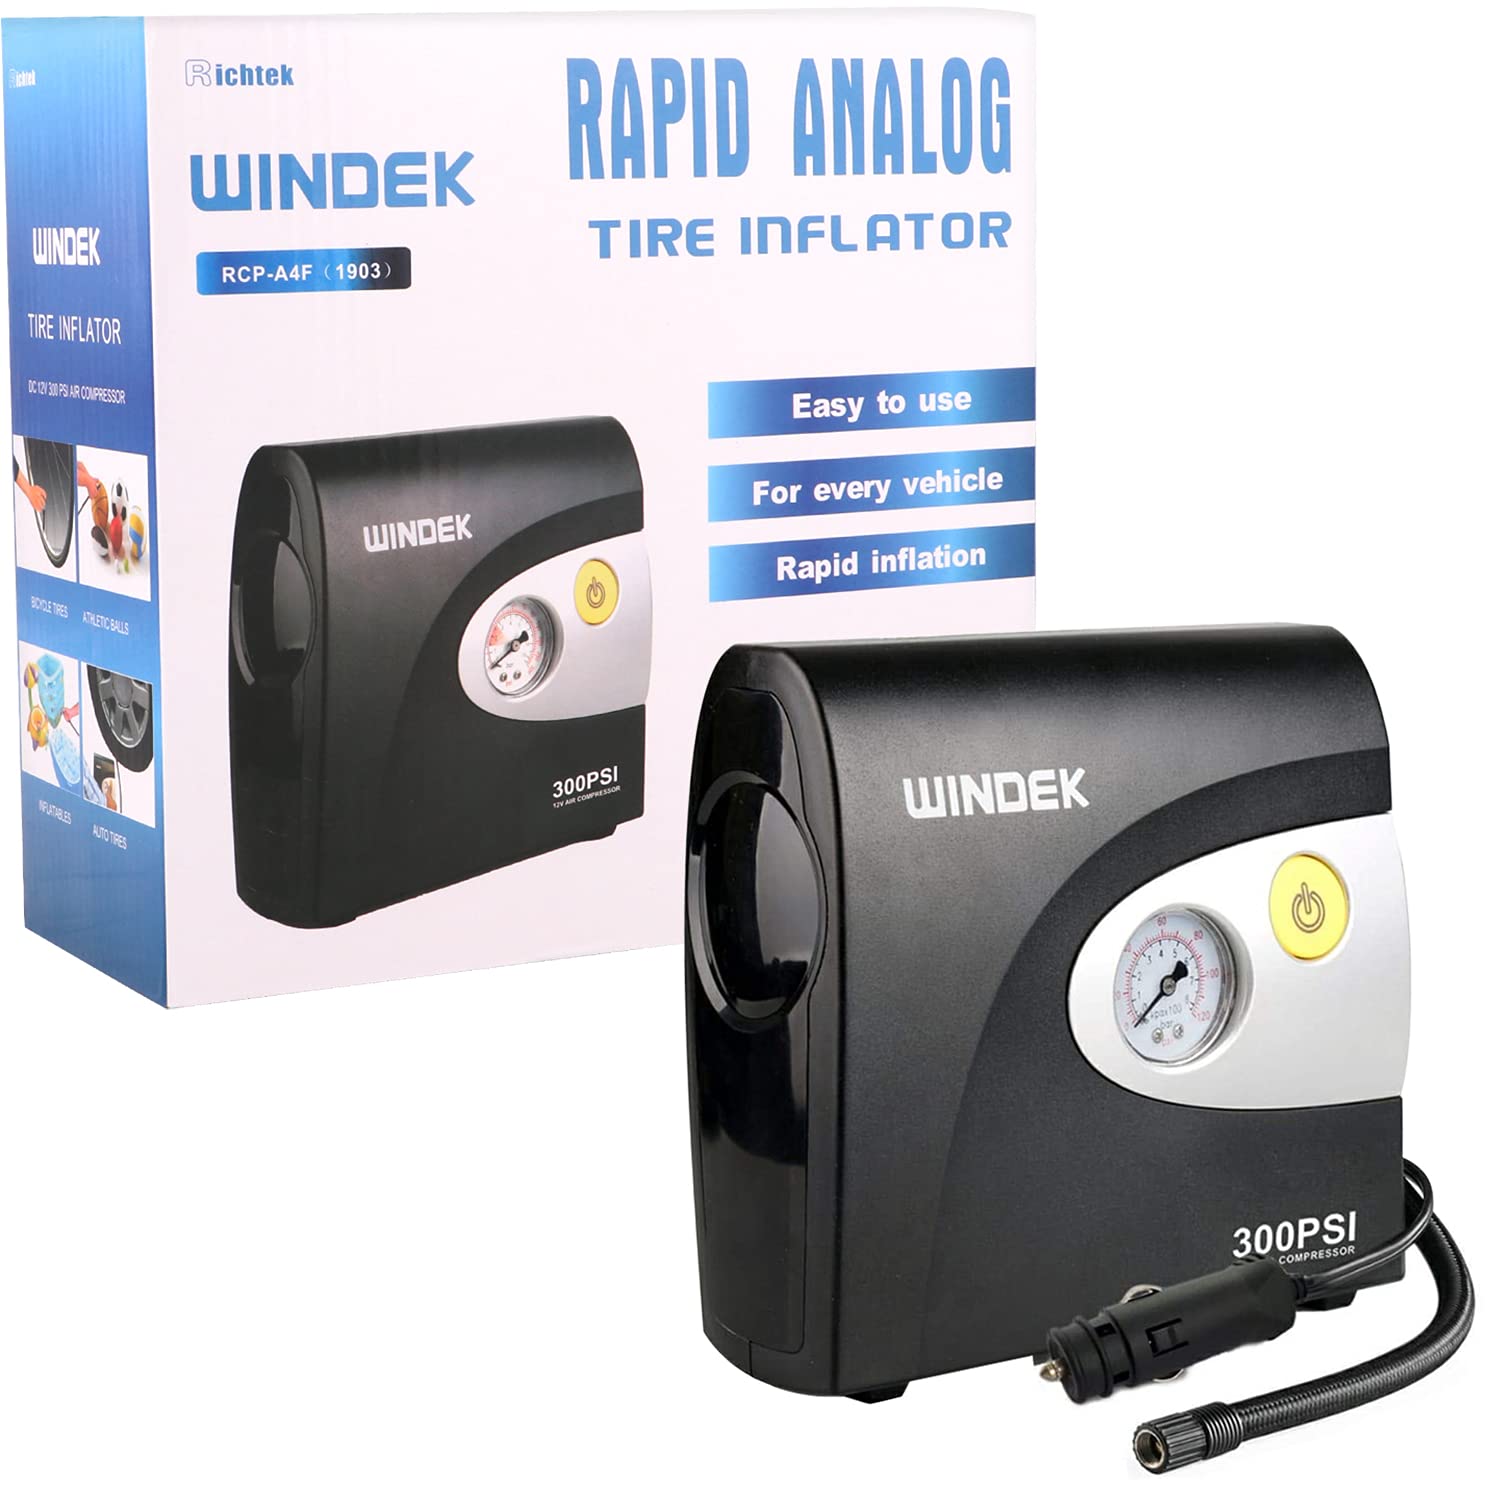 Windek 1903 Compact Tyre Inflator Air Pump 300 PSI with Powerful Compressor Compatible with All Car & Bikes (Black)